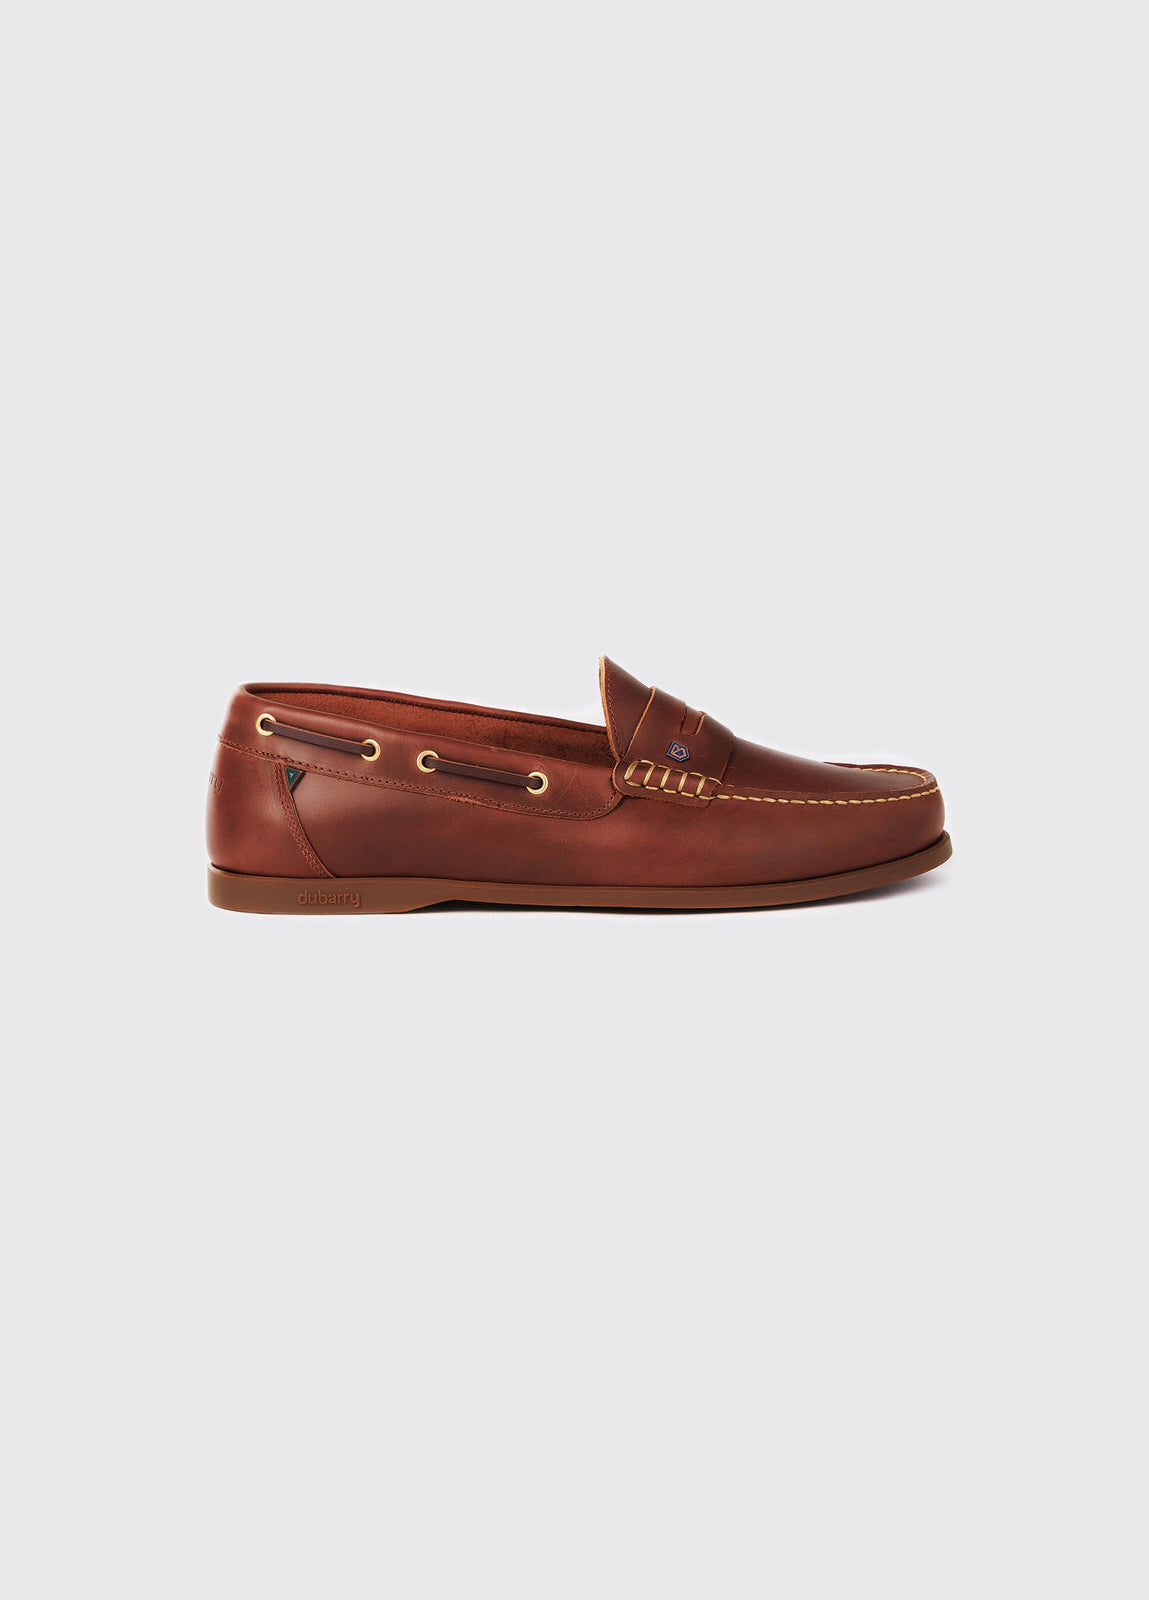 Dubarry Spinnaker Moccasin - Brown